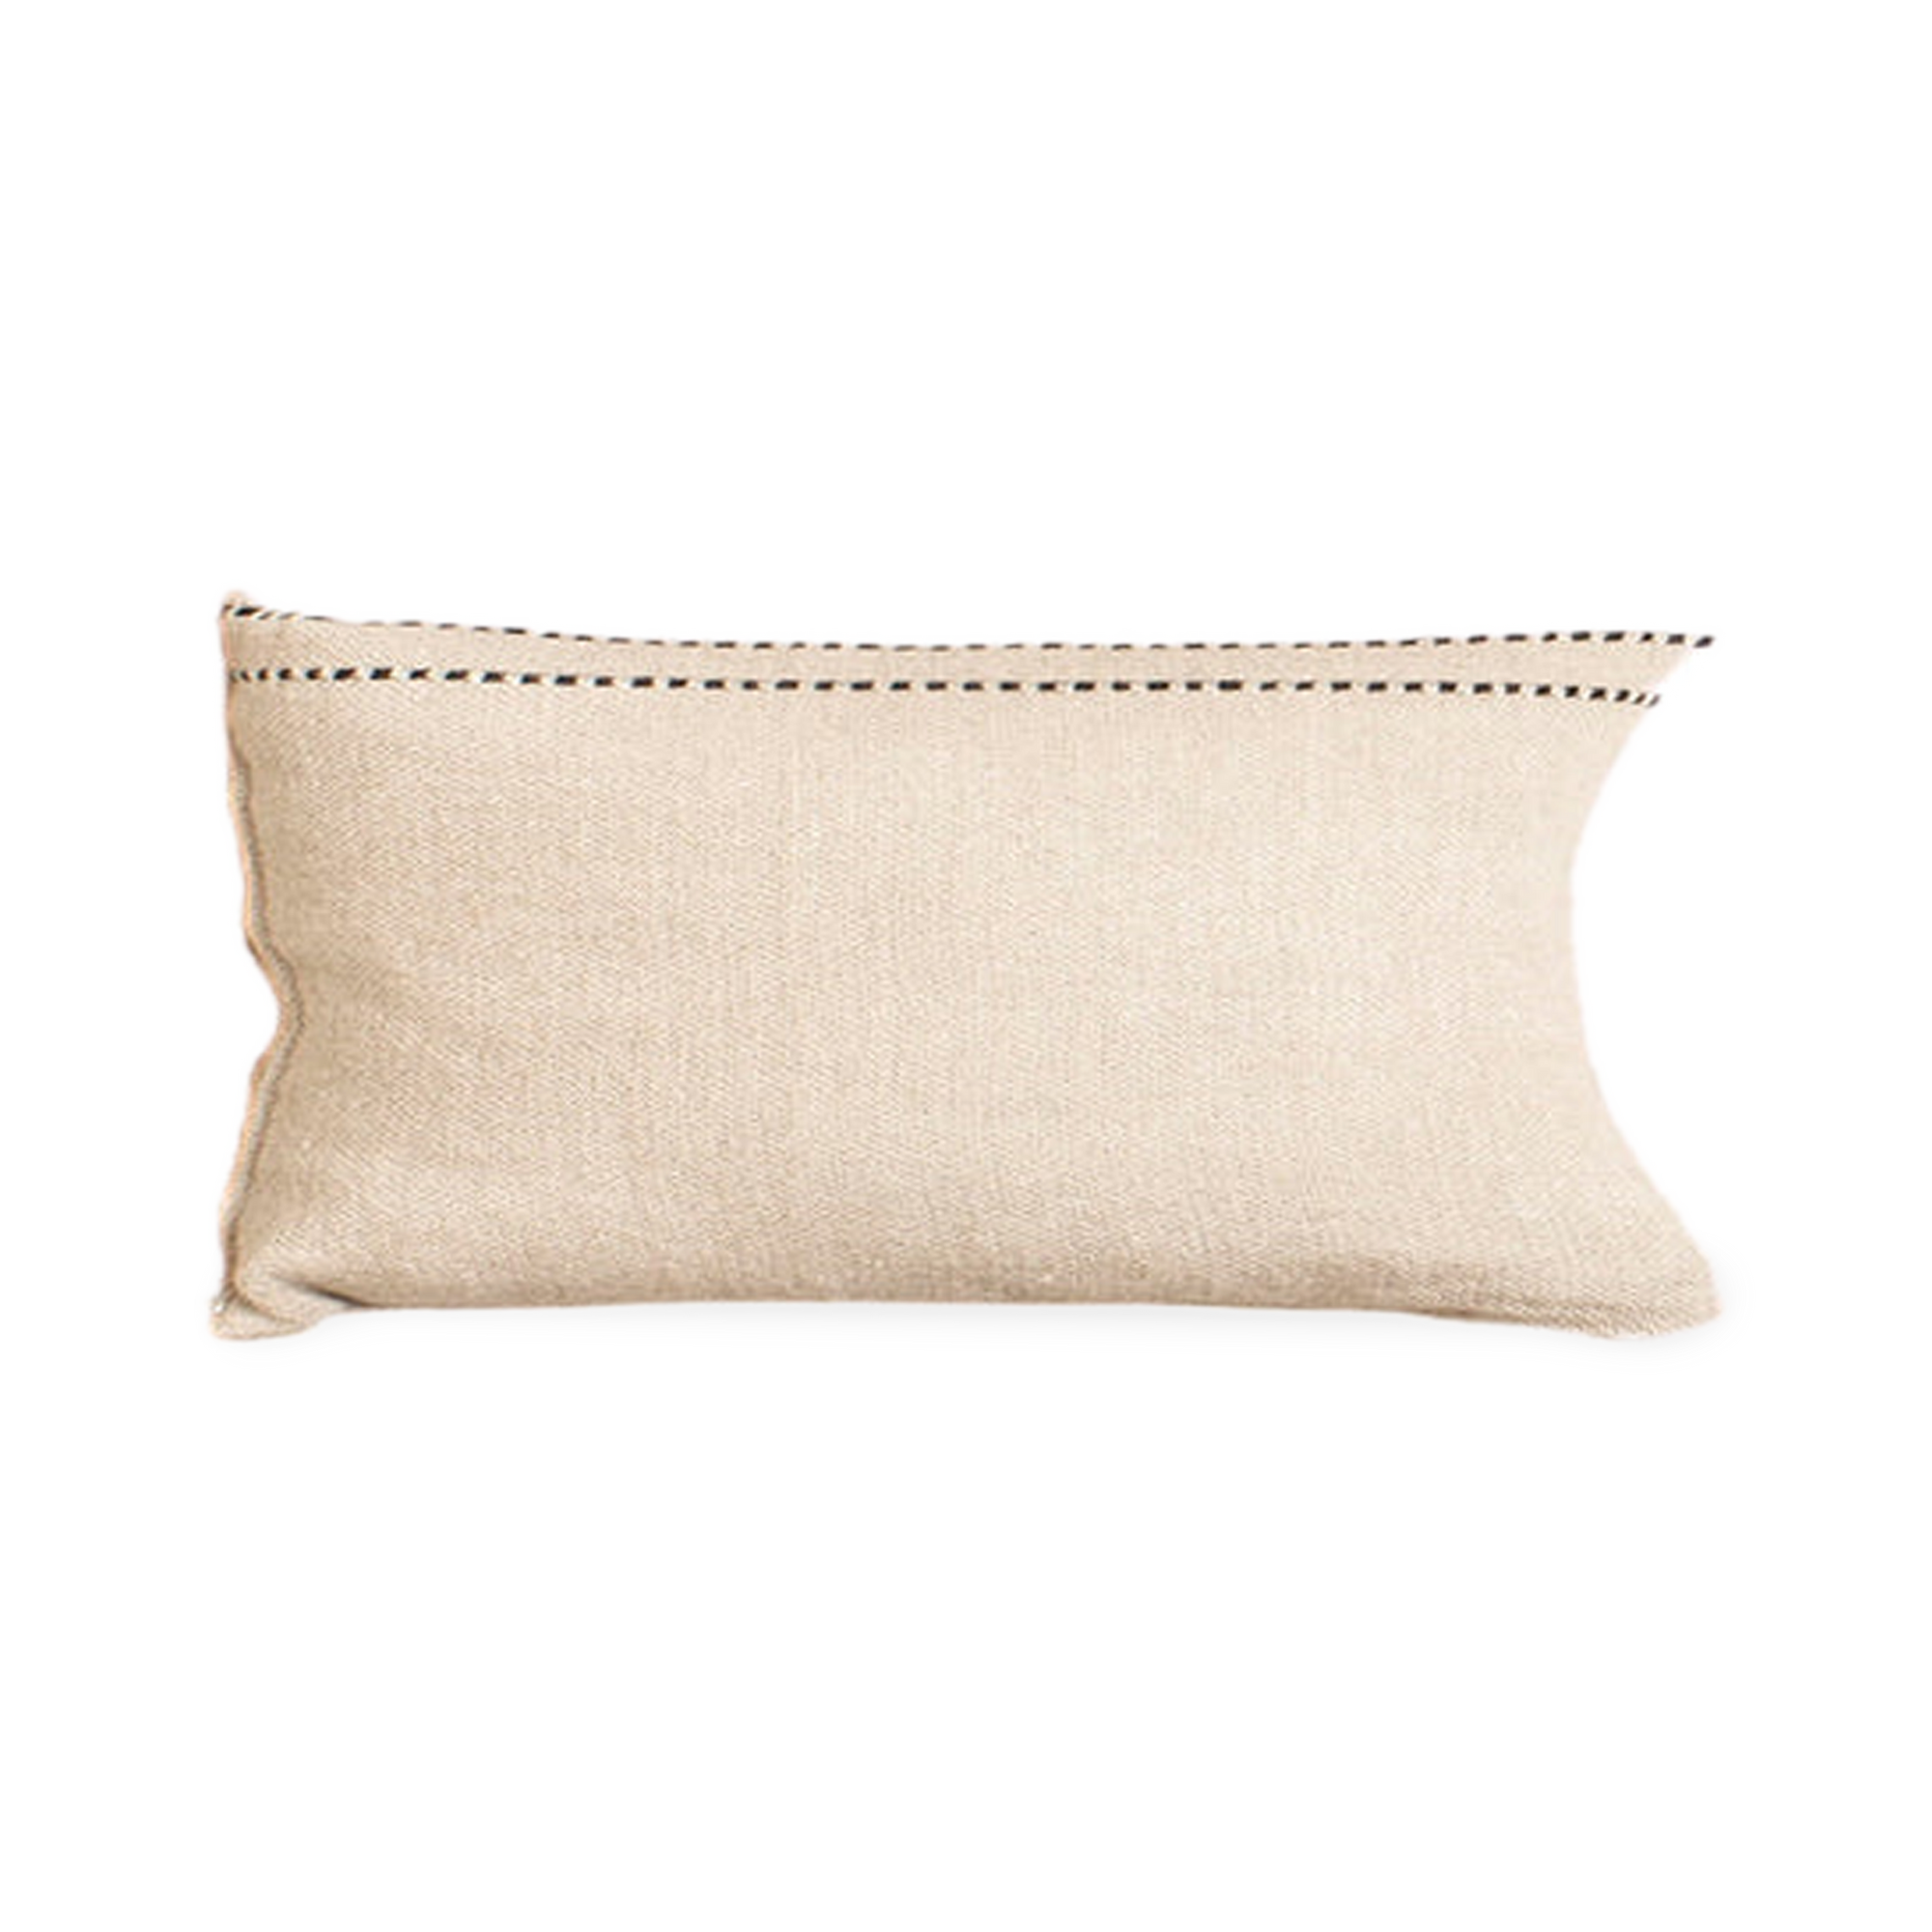 This Cuban Stripe Pillow breathes nature, ecology, and craftsmanship.